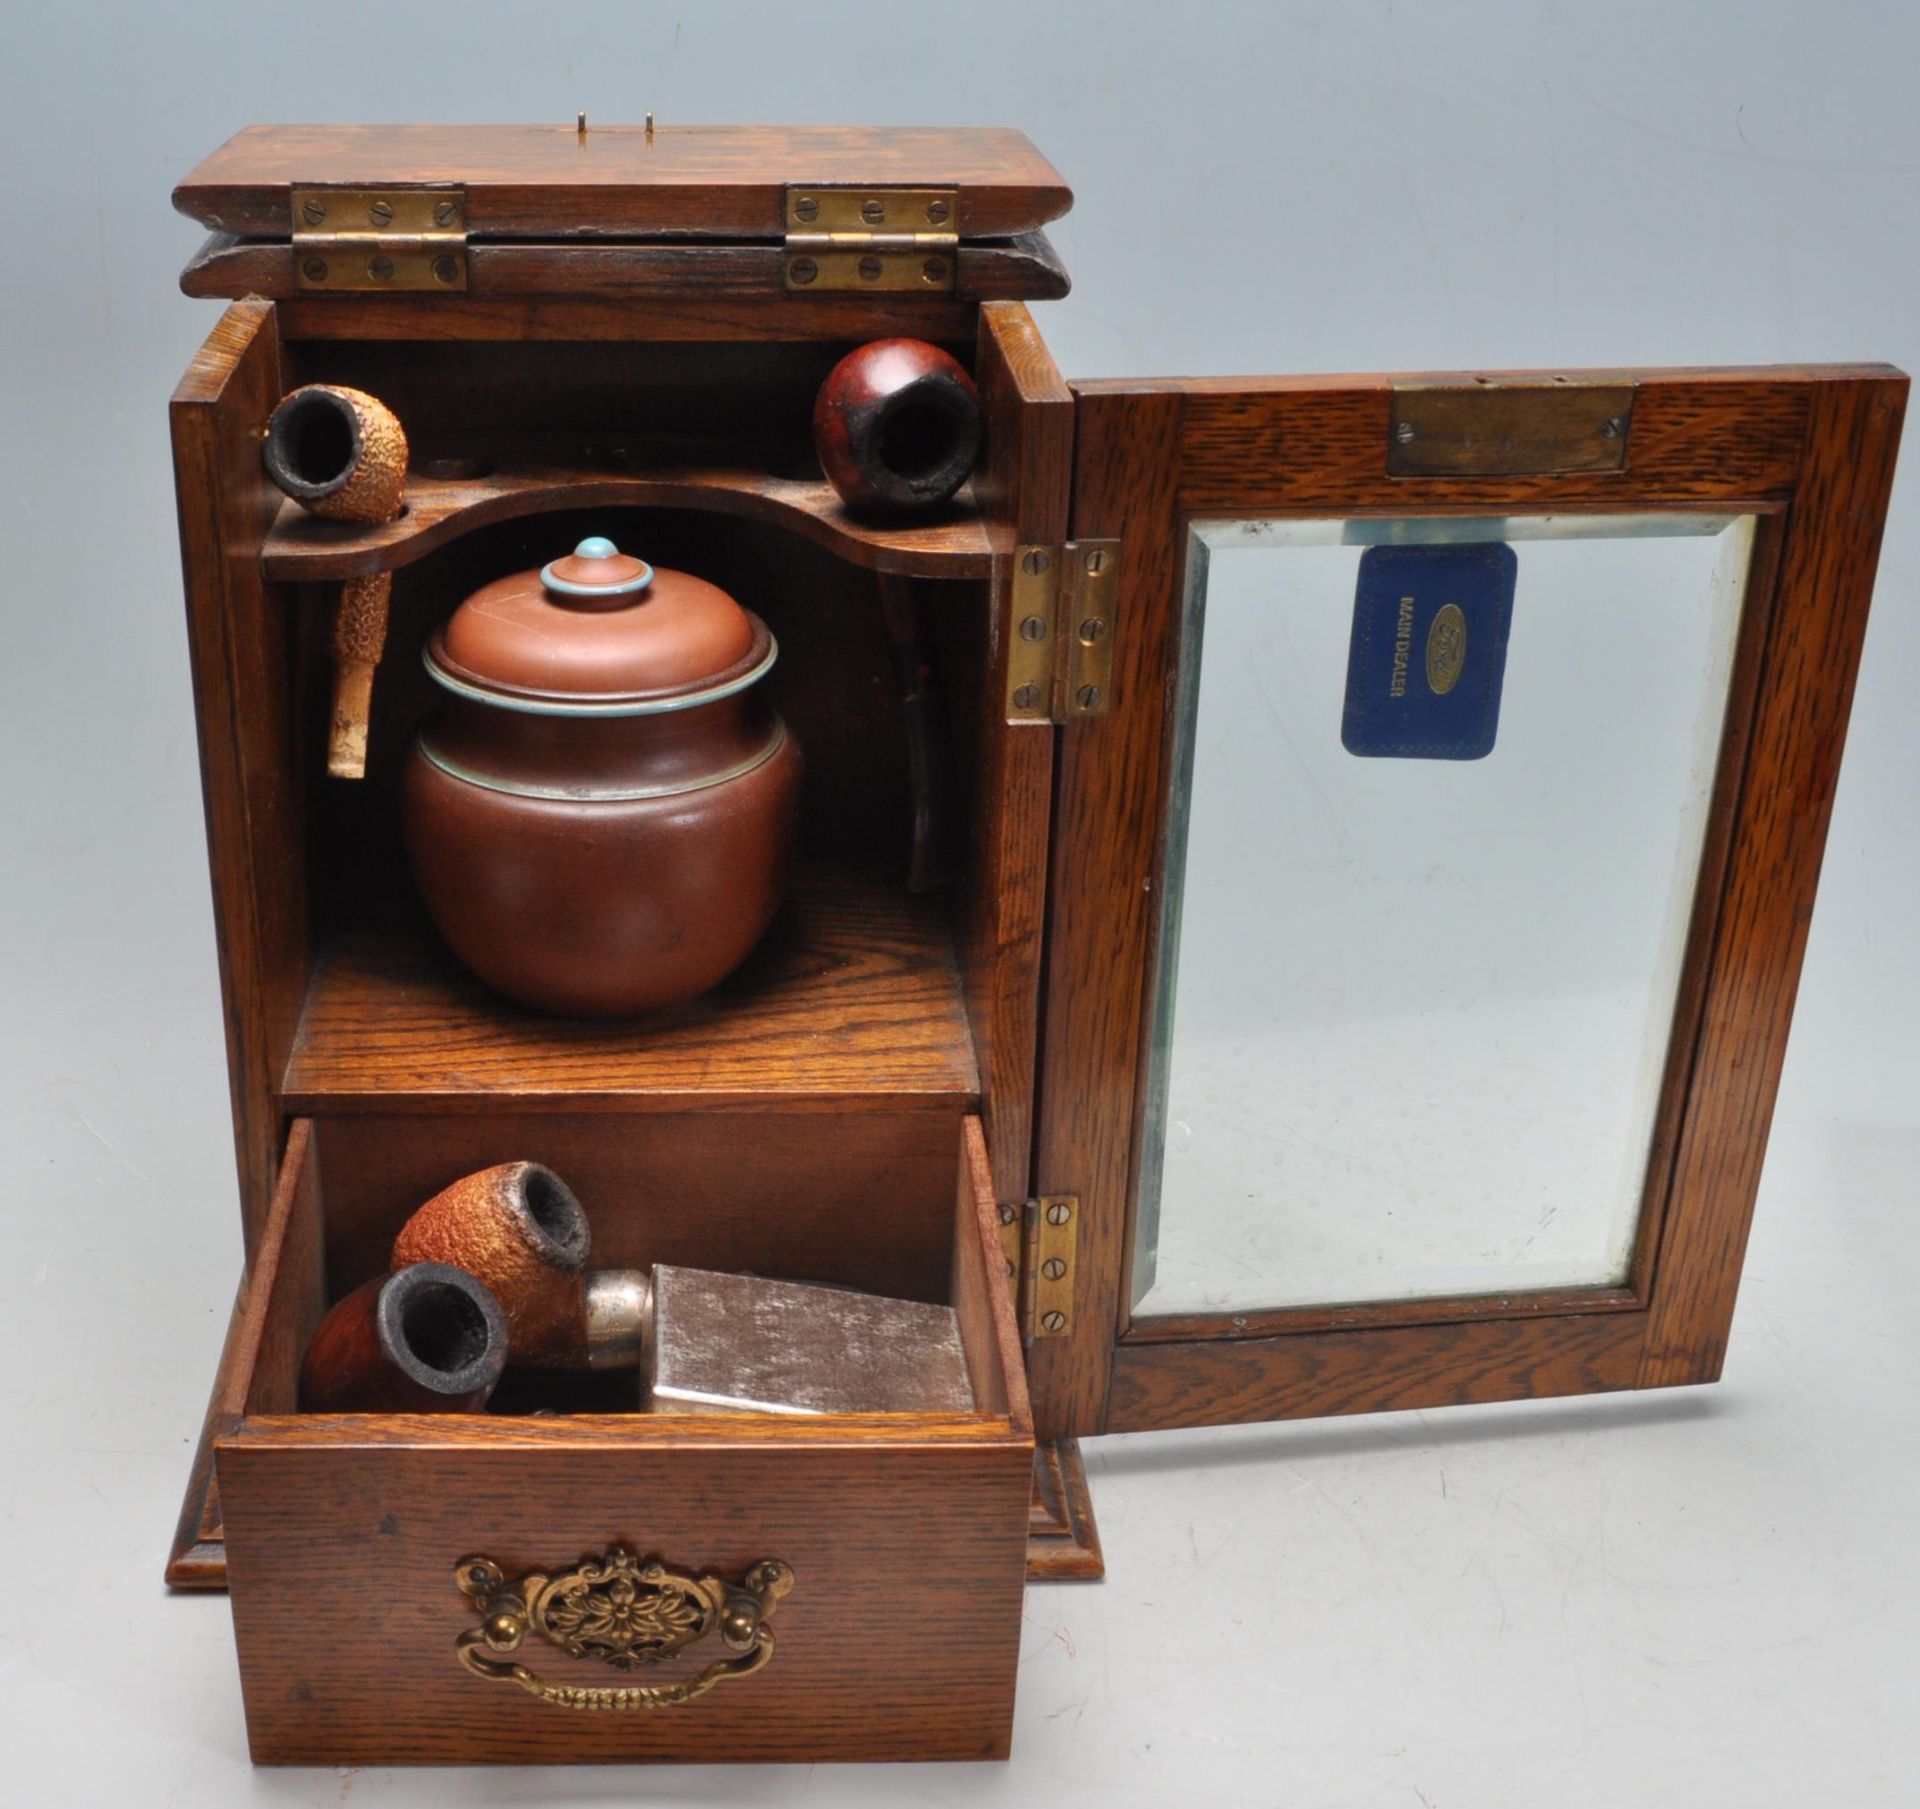 19TH CENTURY VICTORIAN OAK SMOKERS CABINET COMPLETE WITH PIPES, TOBACCO JAR, LIGHTER AND TOOLS - Image 2 of 6